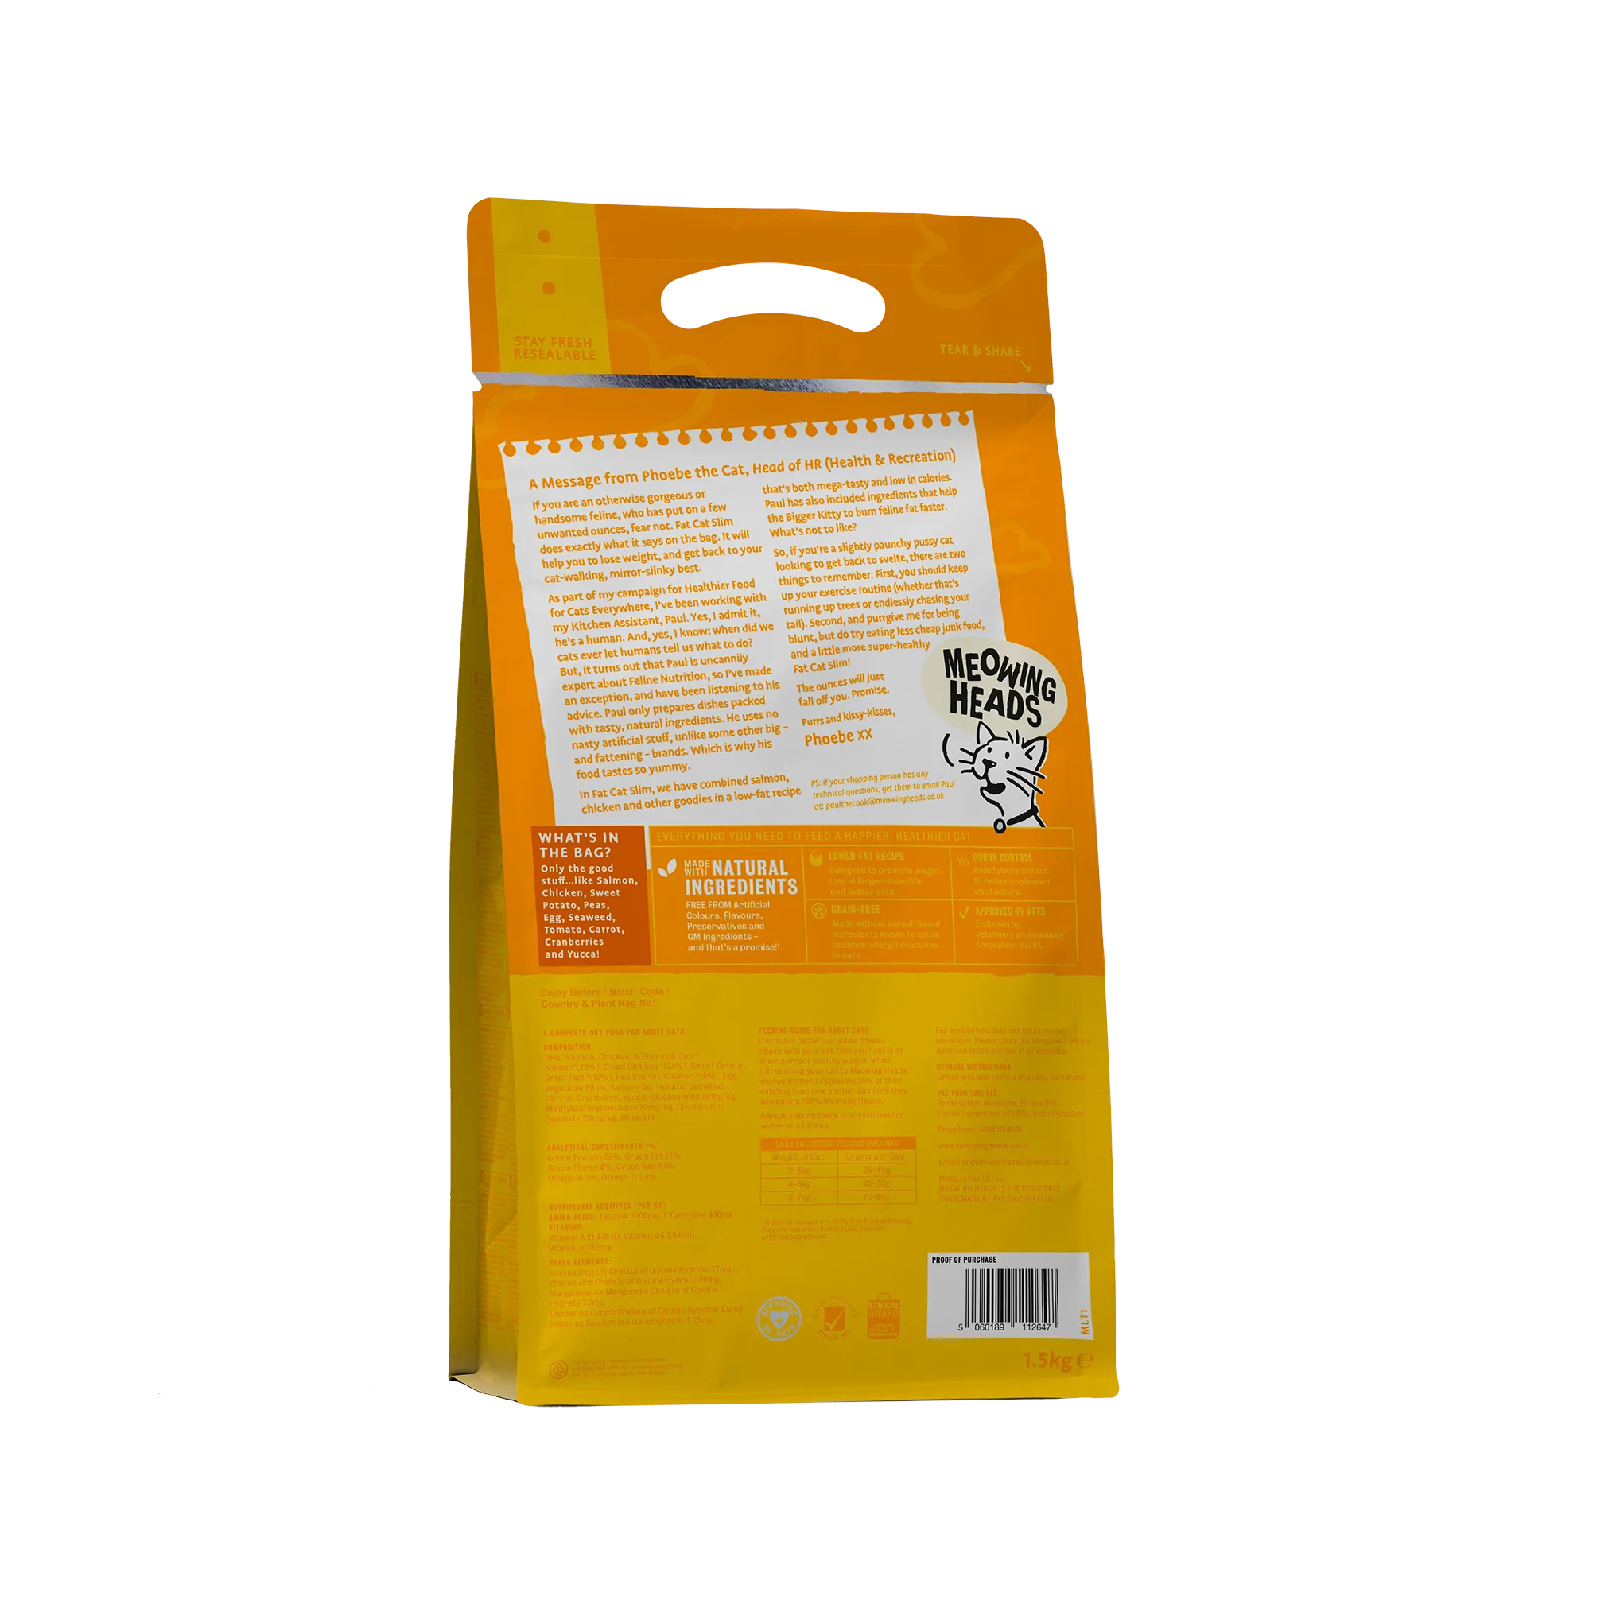 Meowing Heads Fat Cat Slim 1.5kg - Back of Pack